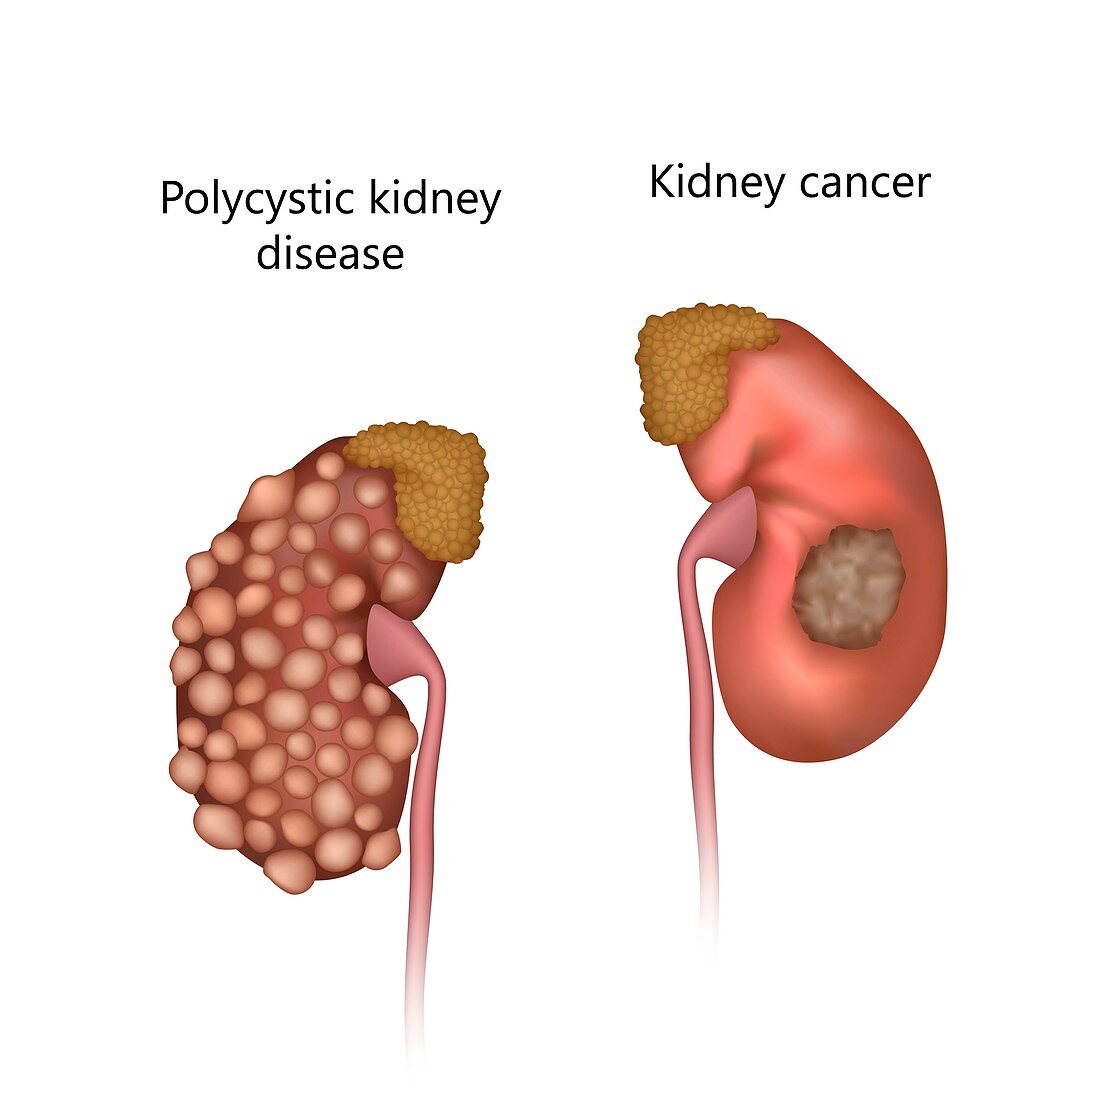 Polycystic kidney disease and kidney cancer, illustration